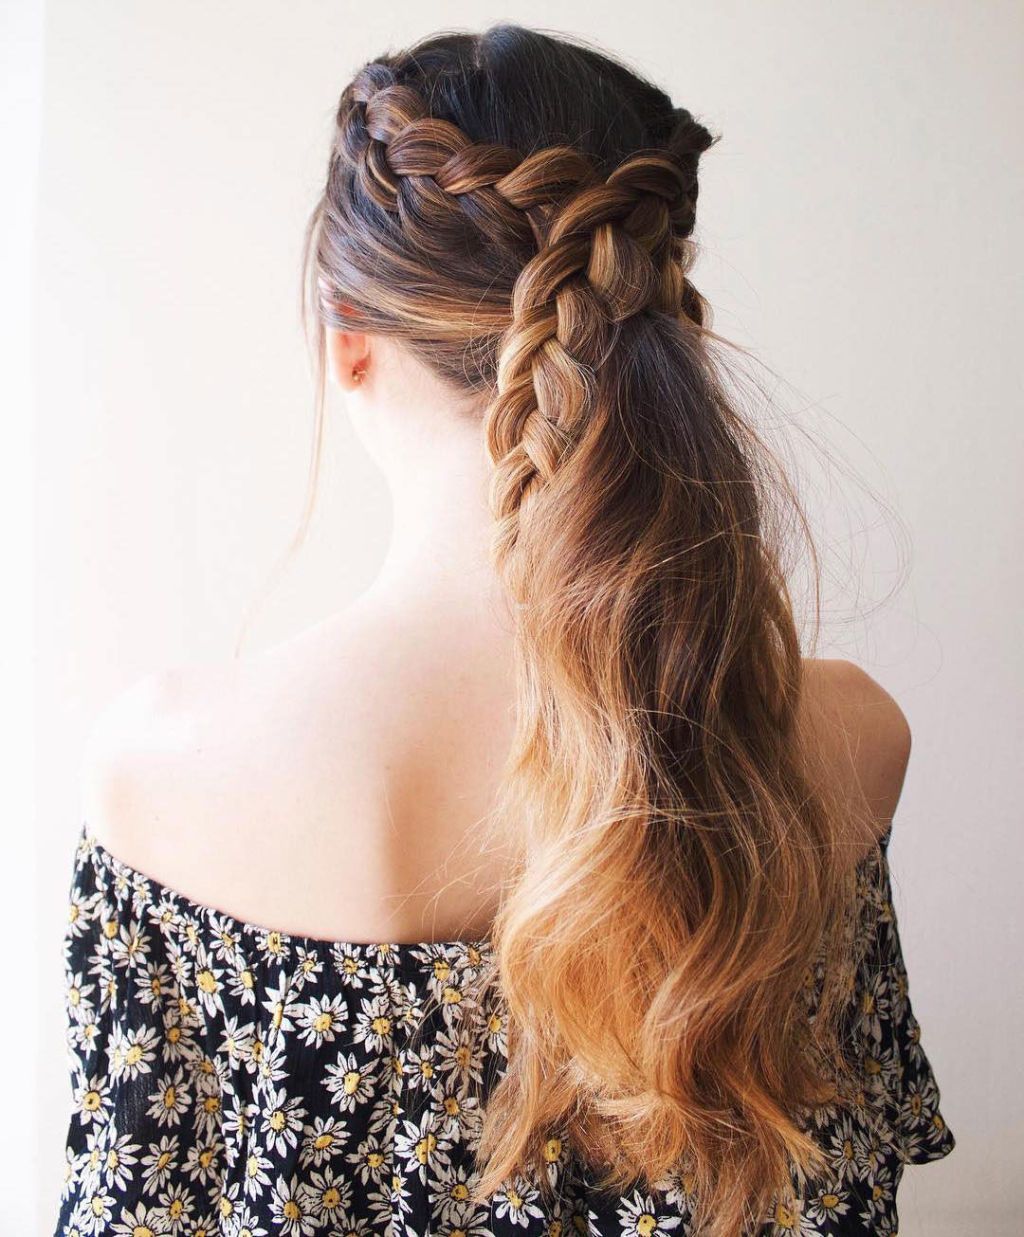 The Knotted Ponytail | Hairstyles for Girls - Cute Girls Hairstyles